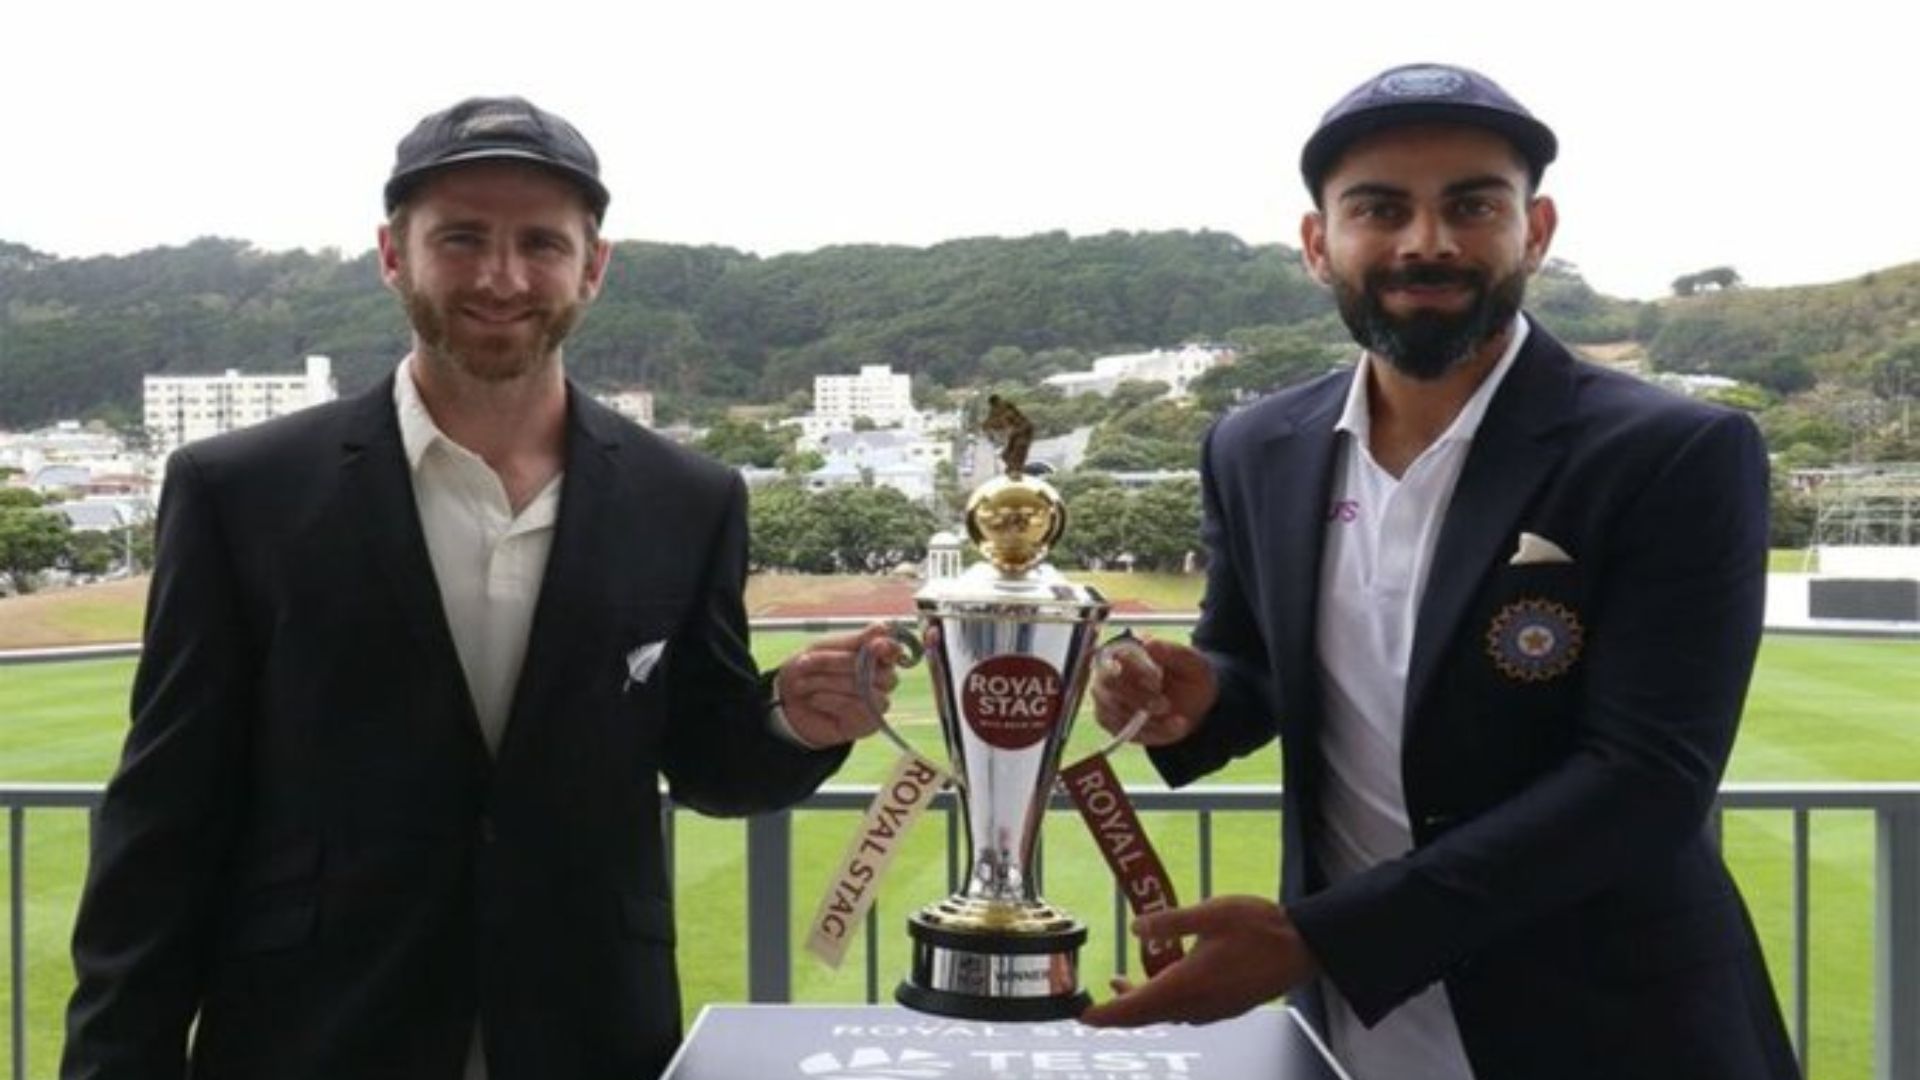 India will take on New Zealand in the final of the ICC World Test Championship in Southampton.